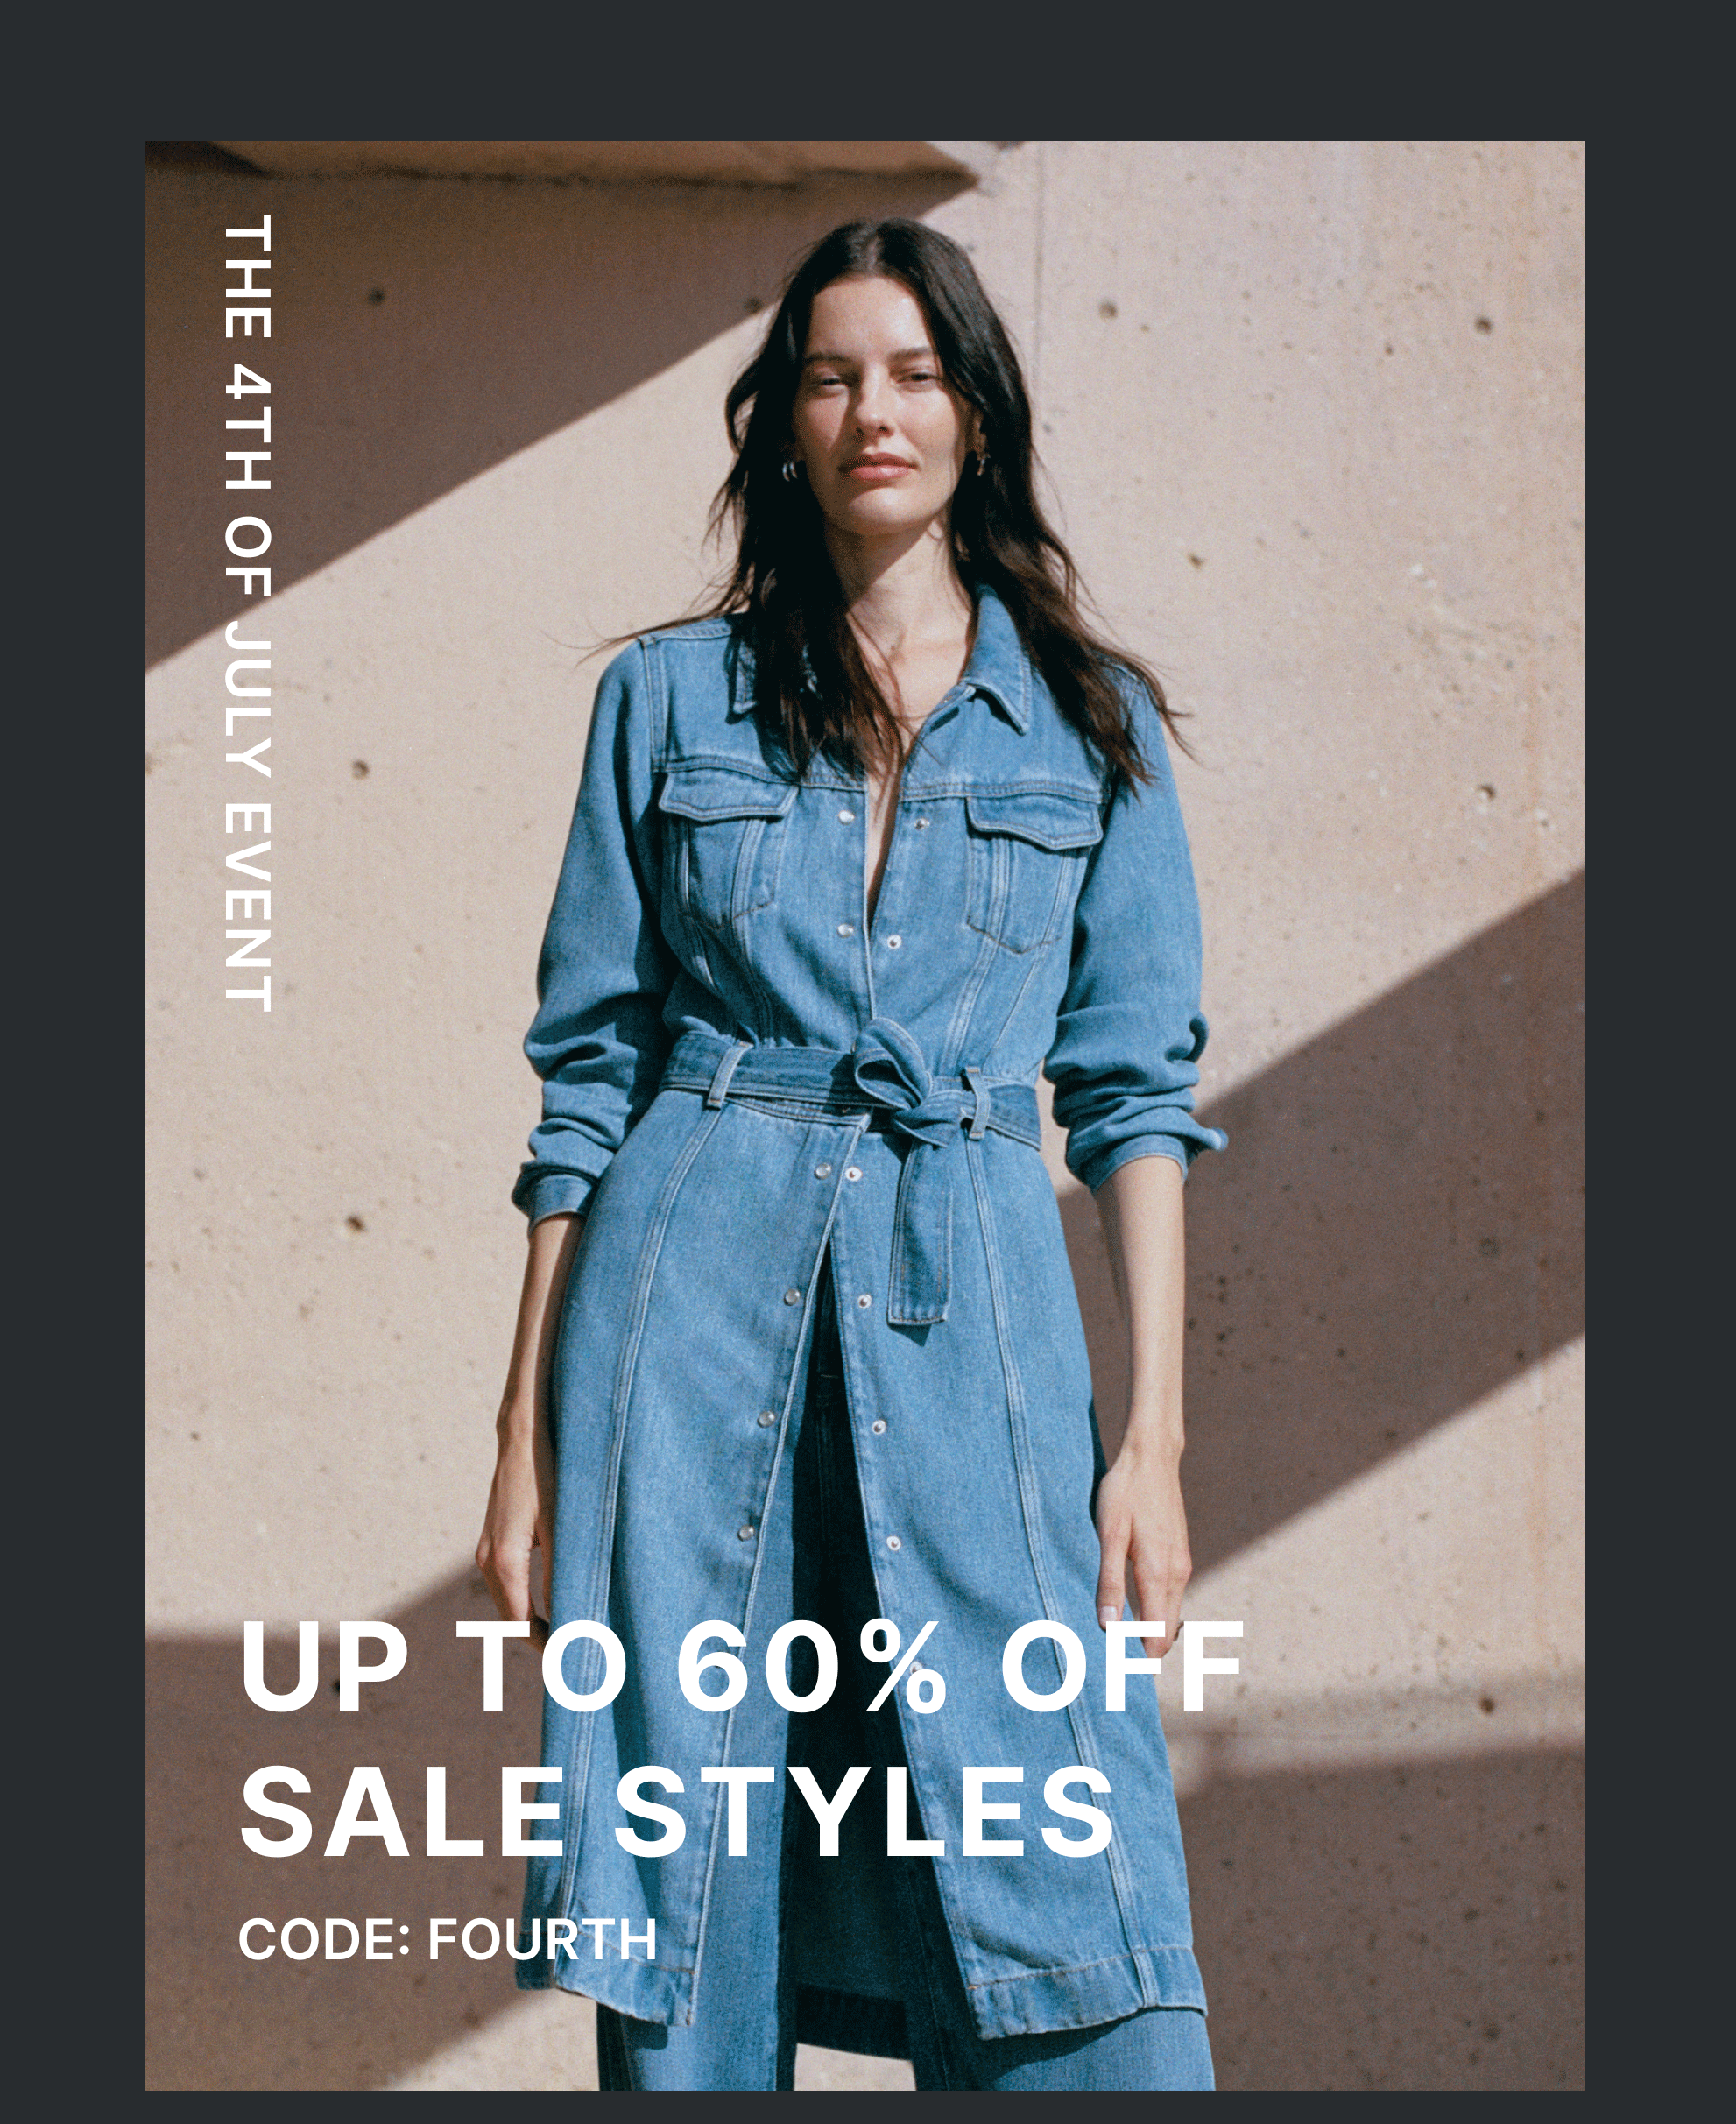 Shop | Up to 60% Off Sale